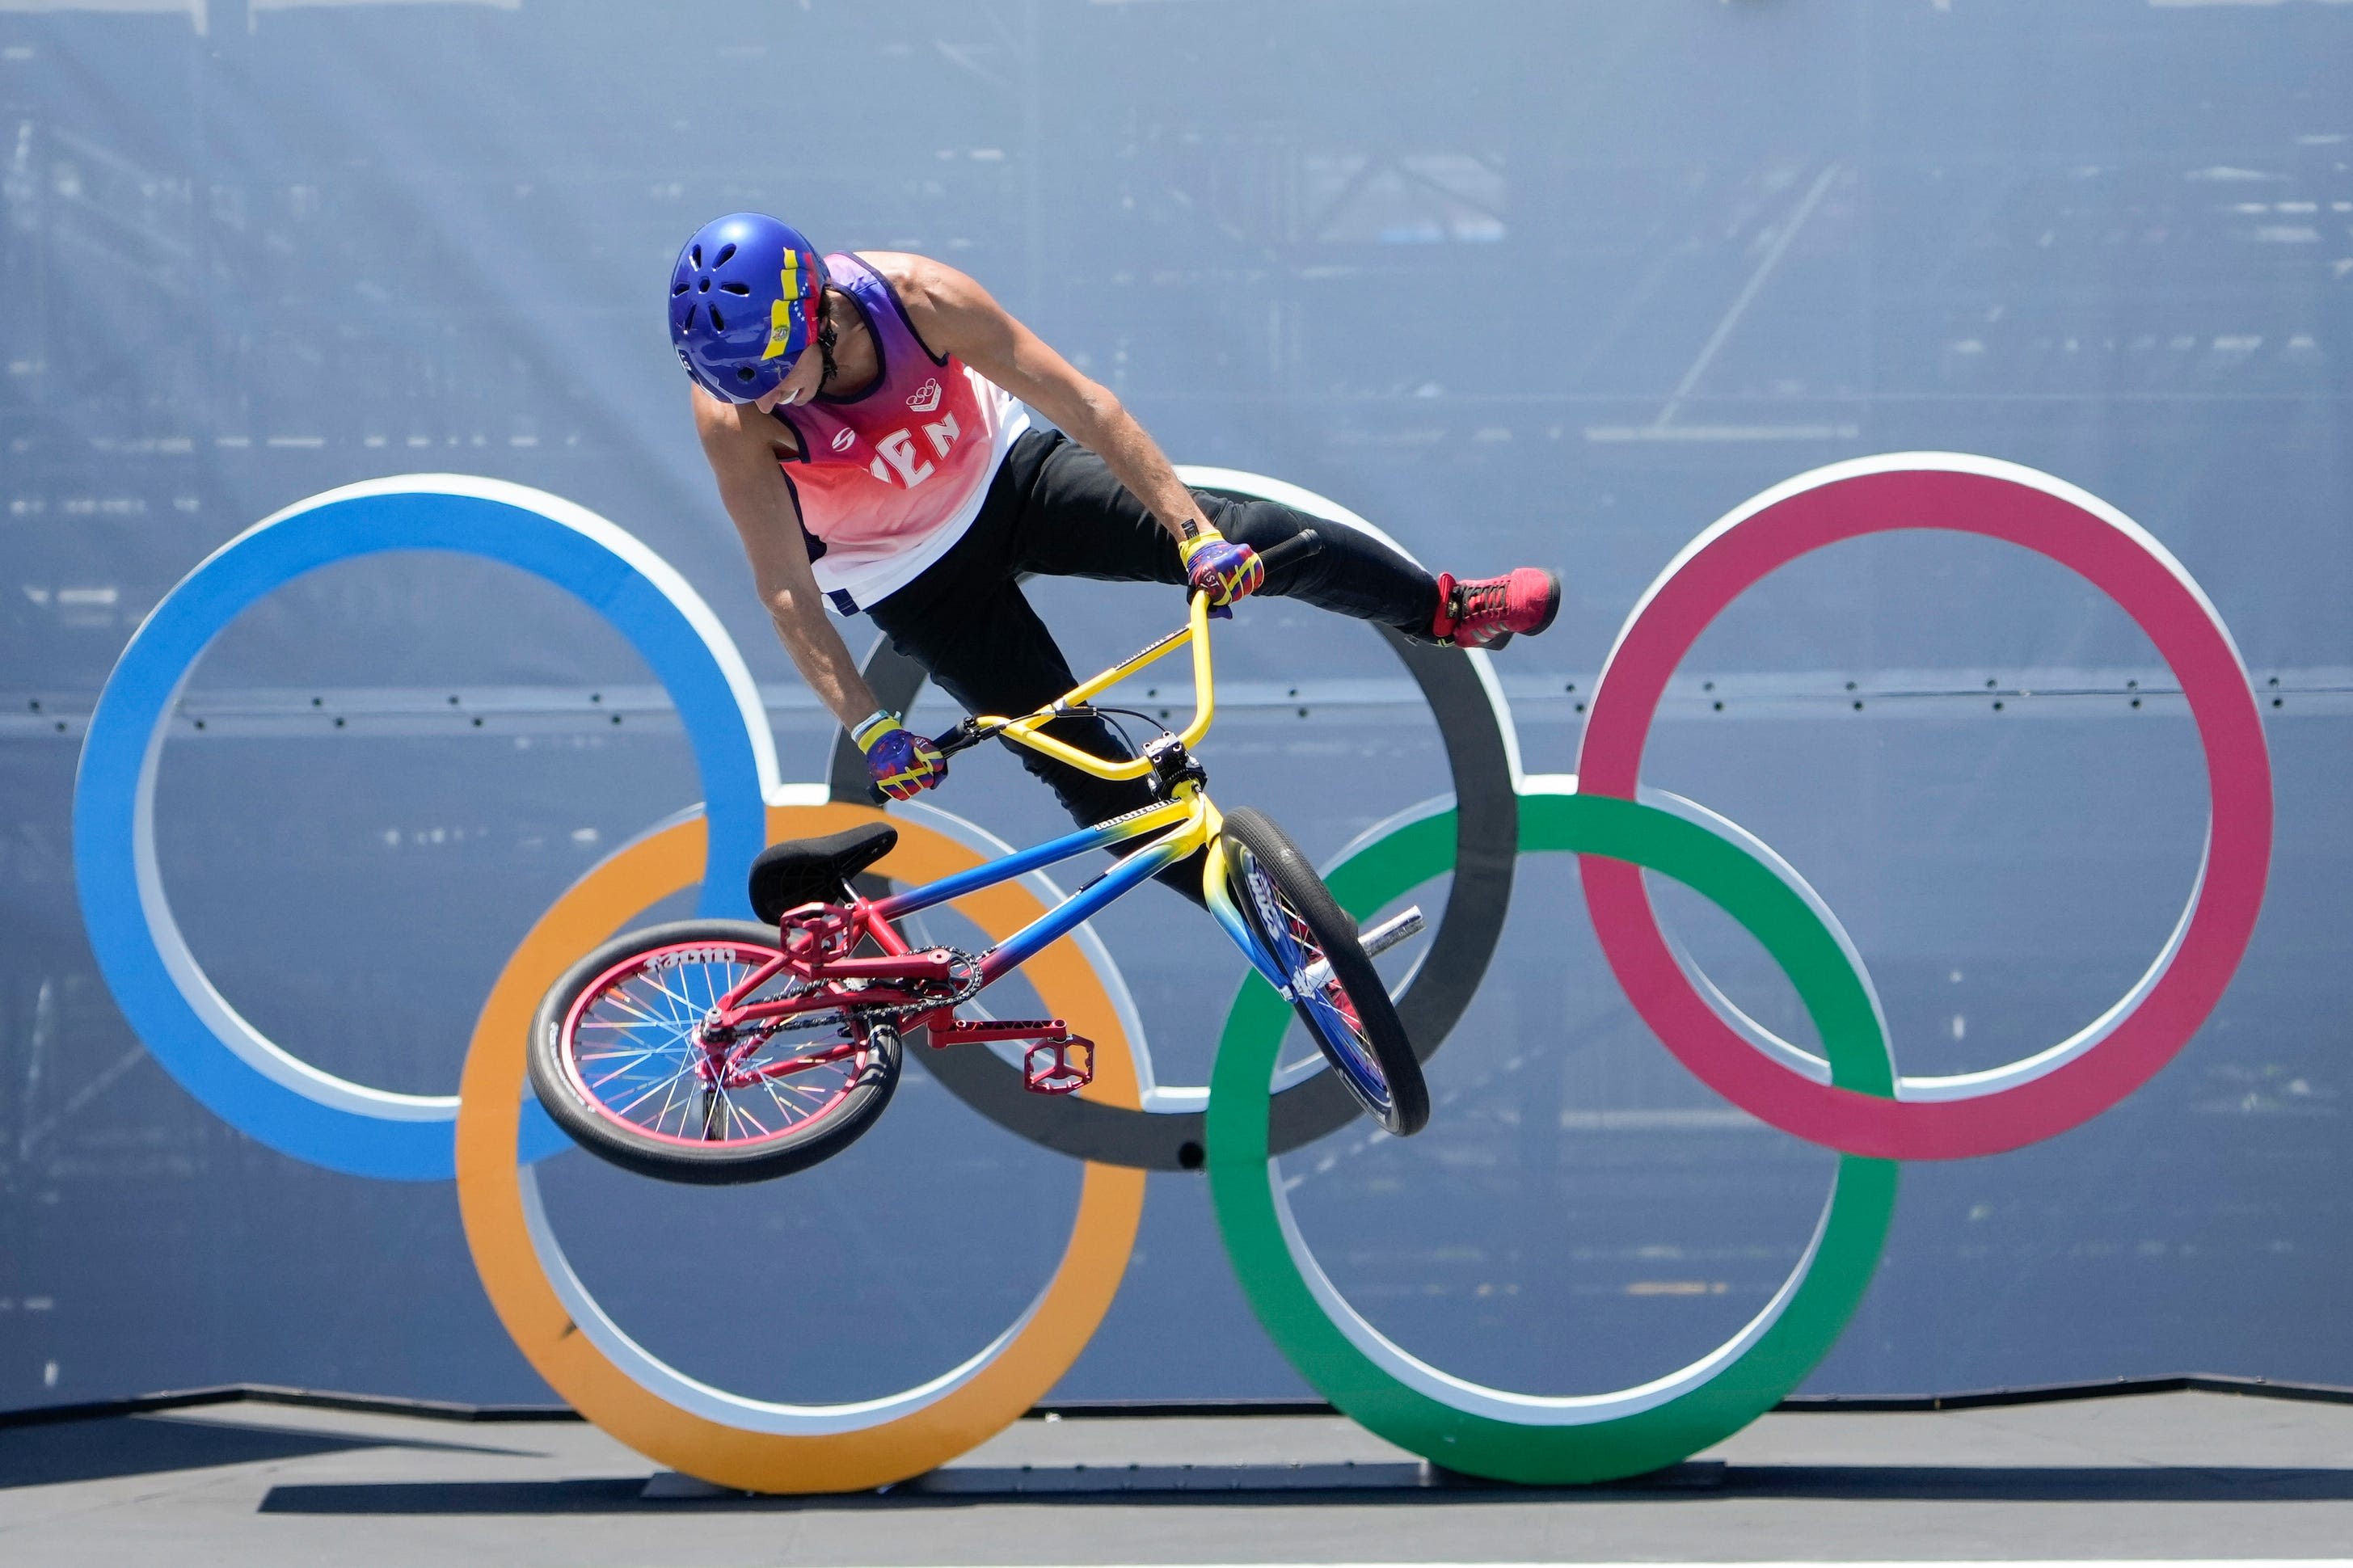 Team USA Olympics BMX Racer Cam Wood on the 'adrenaline rush' of competing | The Excerpt